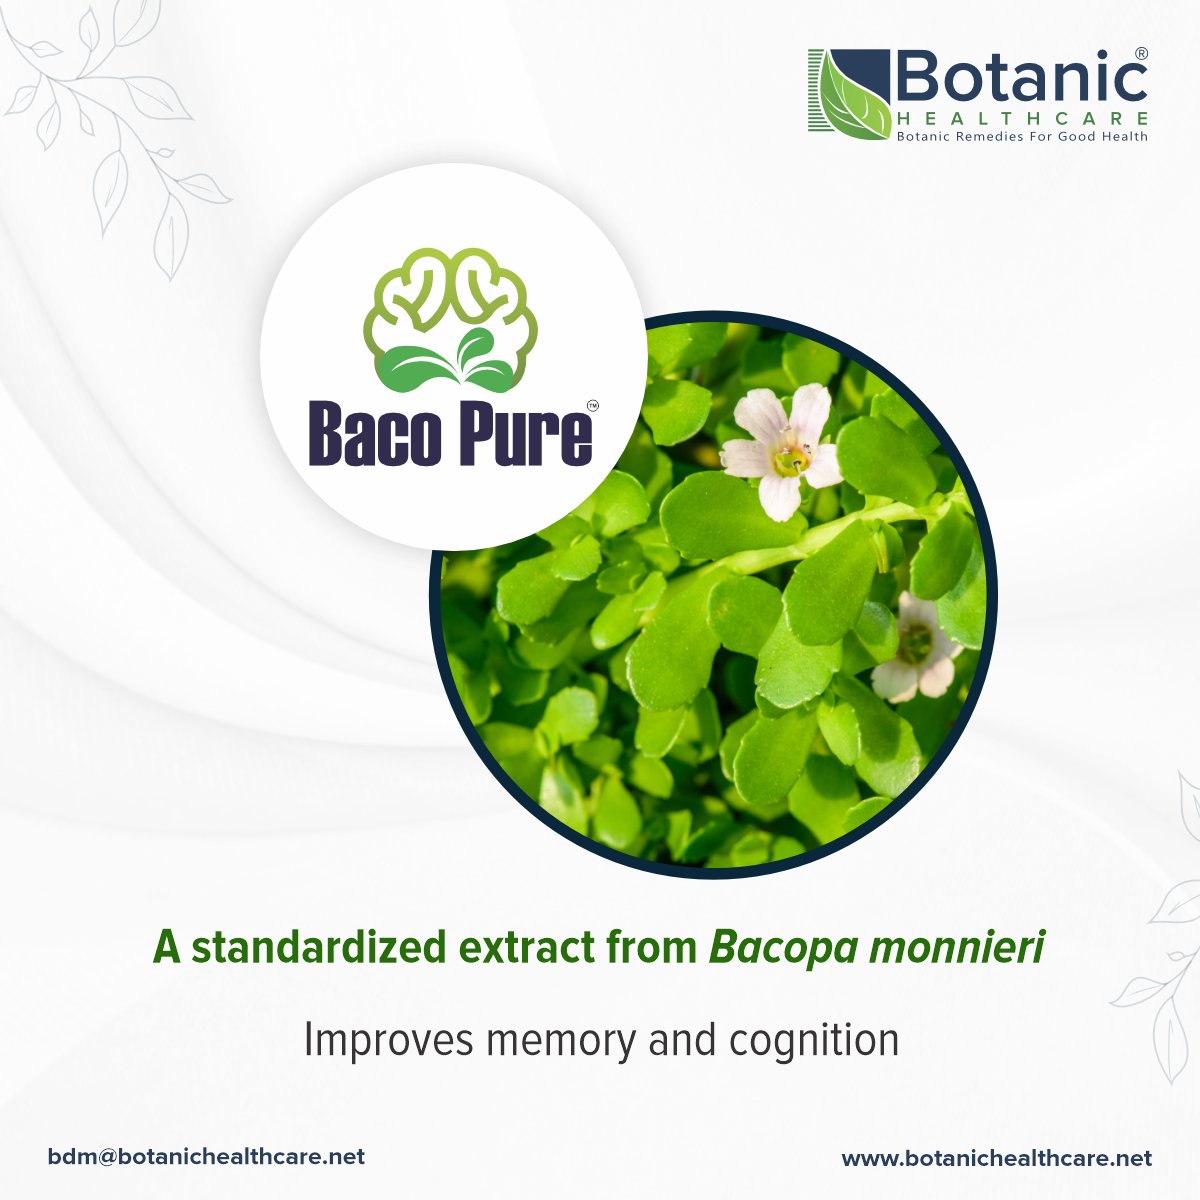 BacoPure™ is a standardized extract of Bacopa monnieri which is an ancient herb with a growing reputation in the scientific community. Studies suggest that Bacopa monnieri may promote memory, learning, and information processing.

#Botanichealthcare #herbalextracts